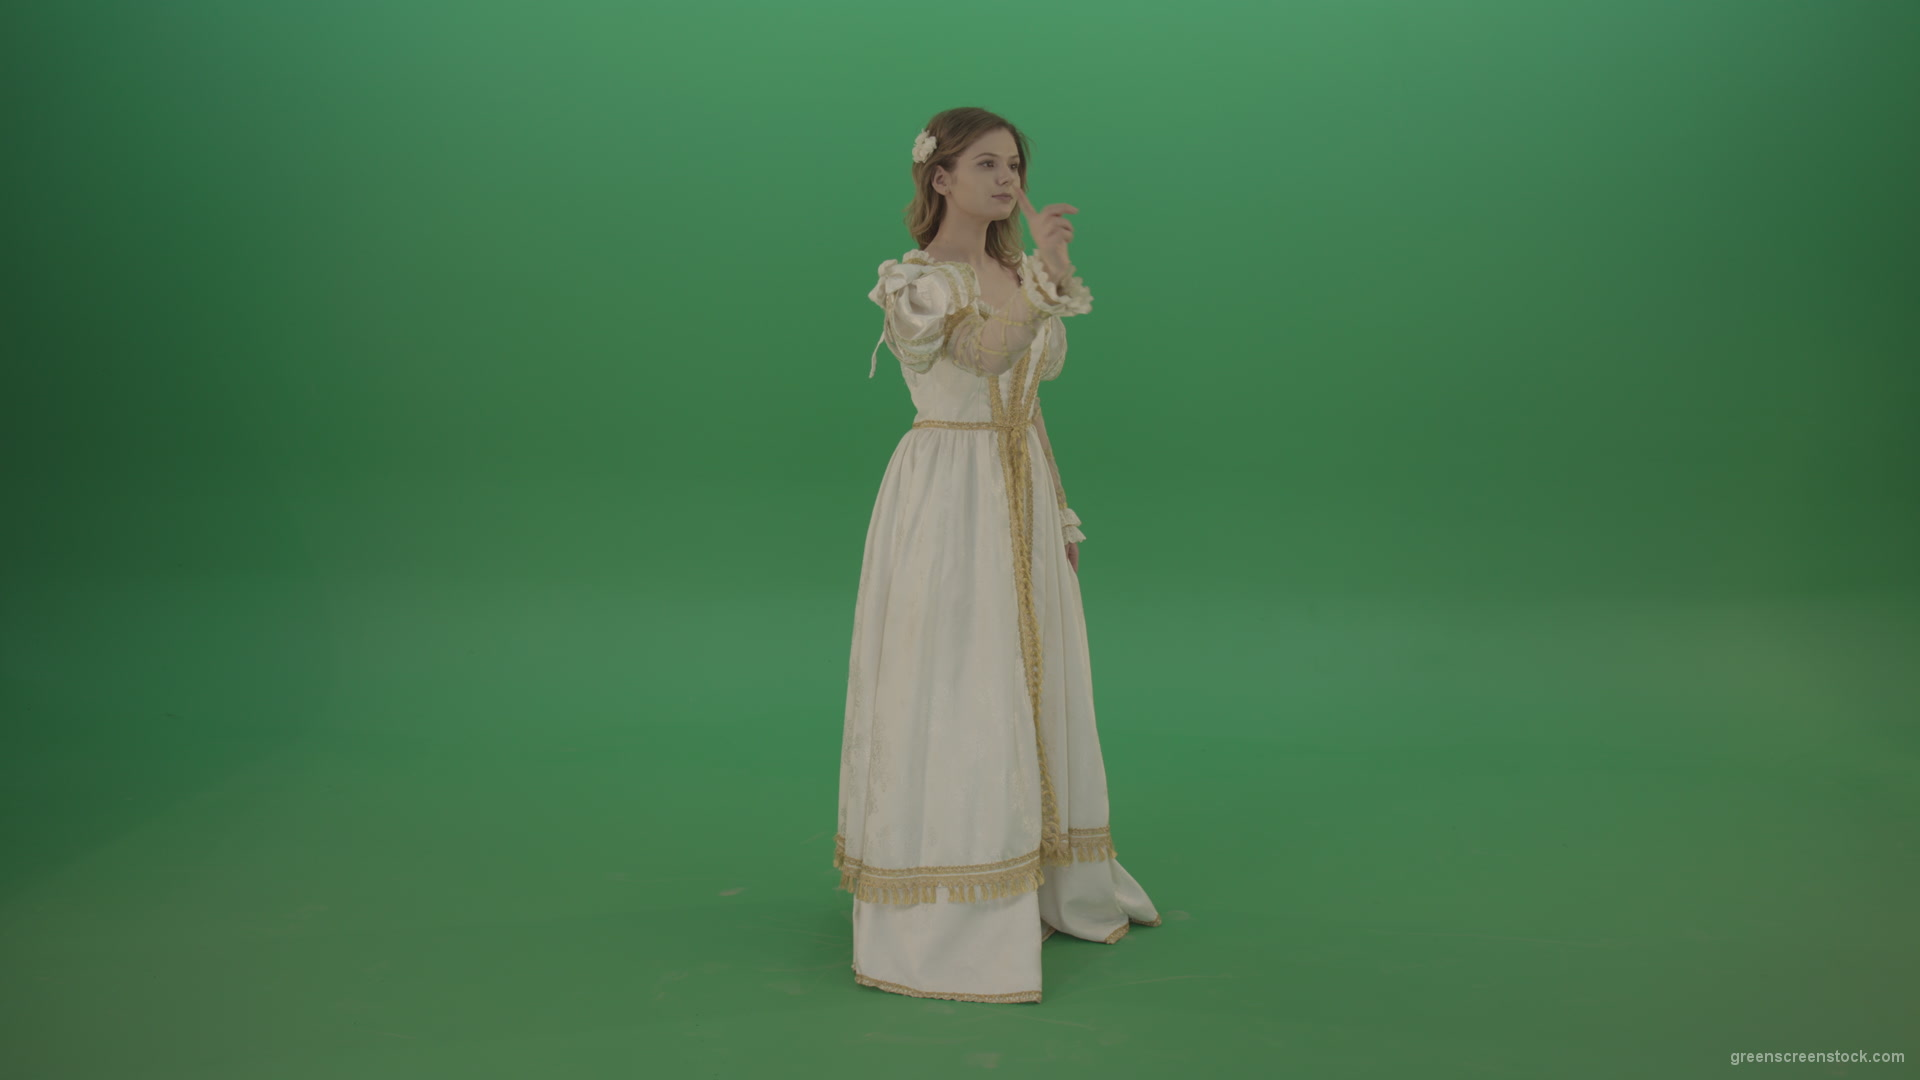 Flips-touchscreen-in-a-white-suit-of-a-medieval-woman-isolated-on-green-screen_005 Green Screen Stock